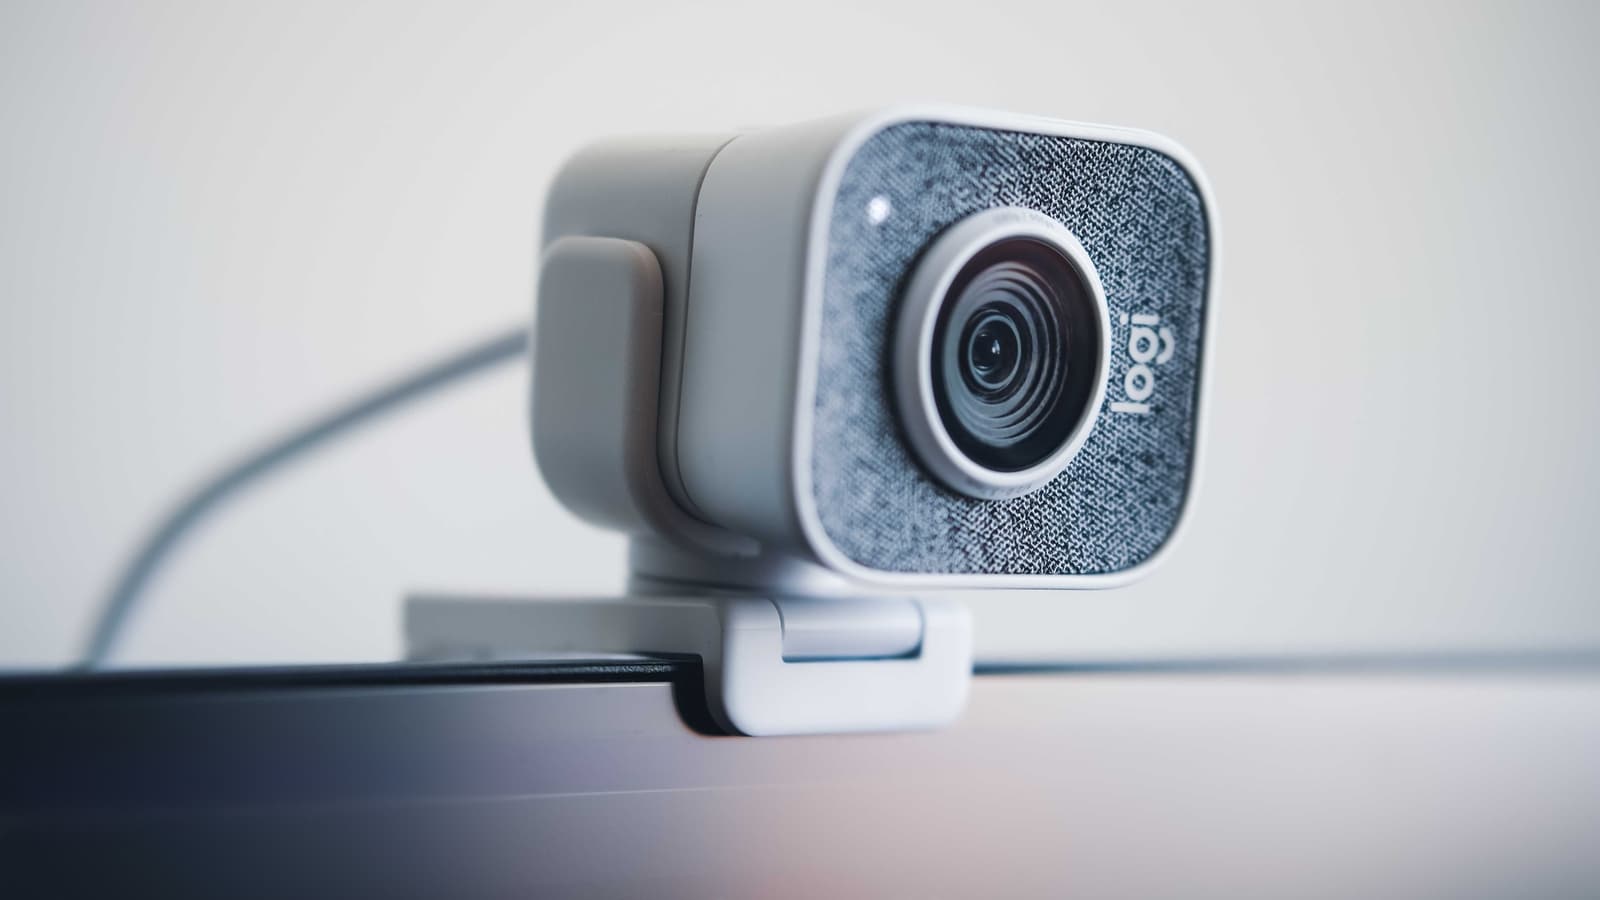 Dutch employee refuses to keep webcam on during work hours, gets fired: Report